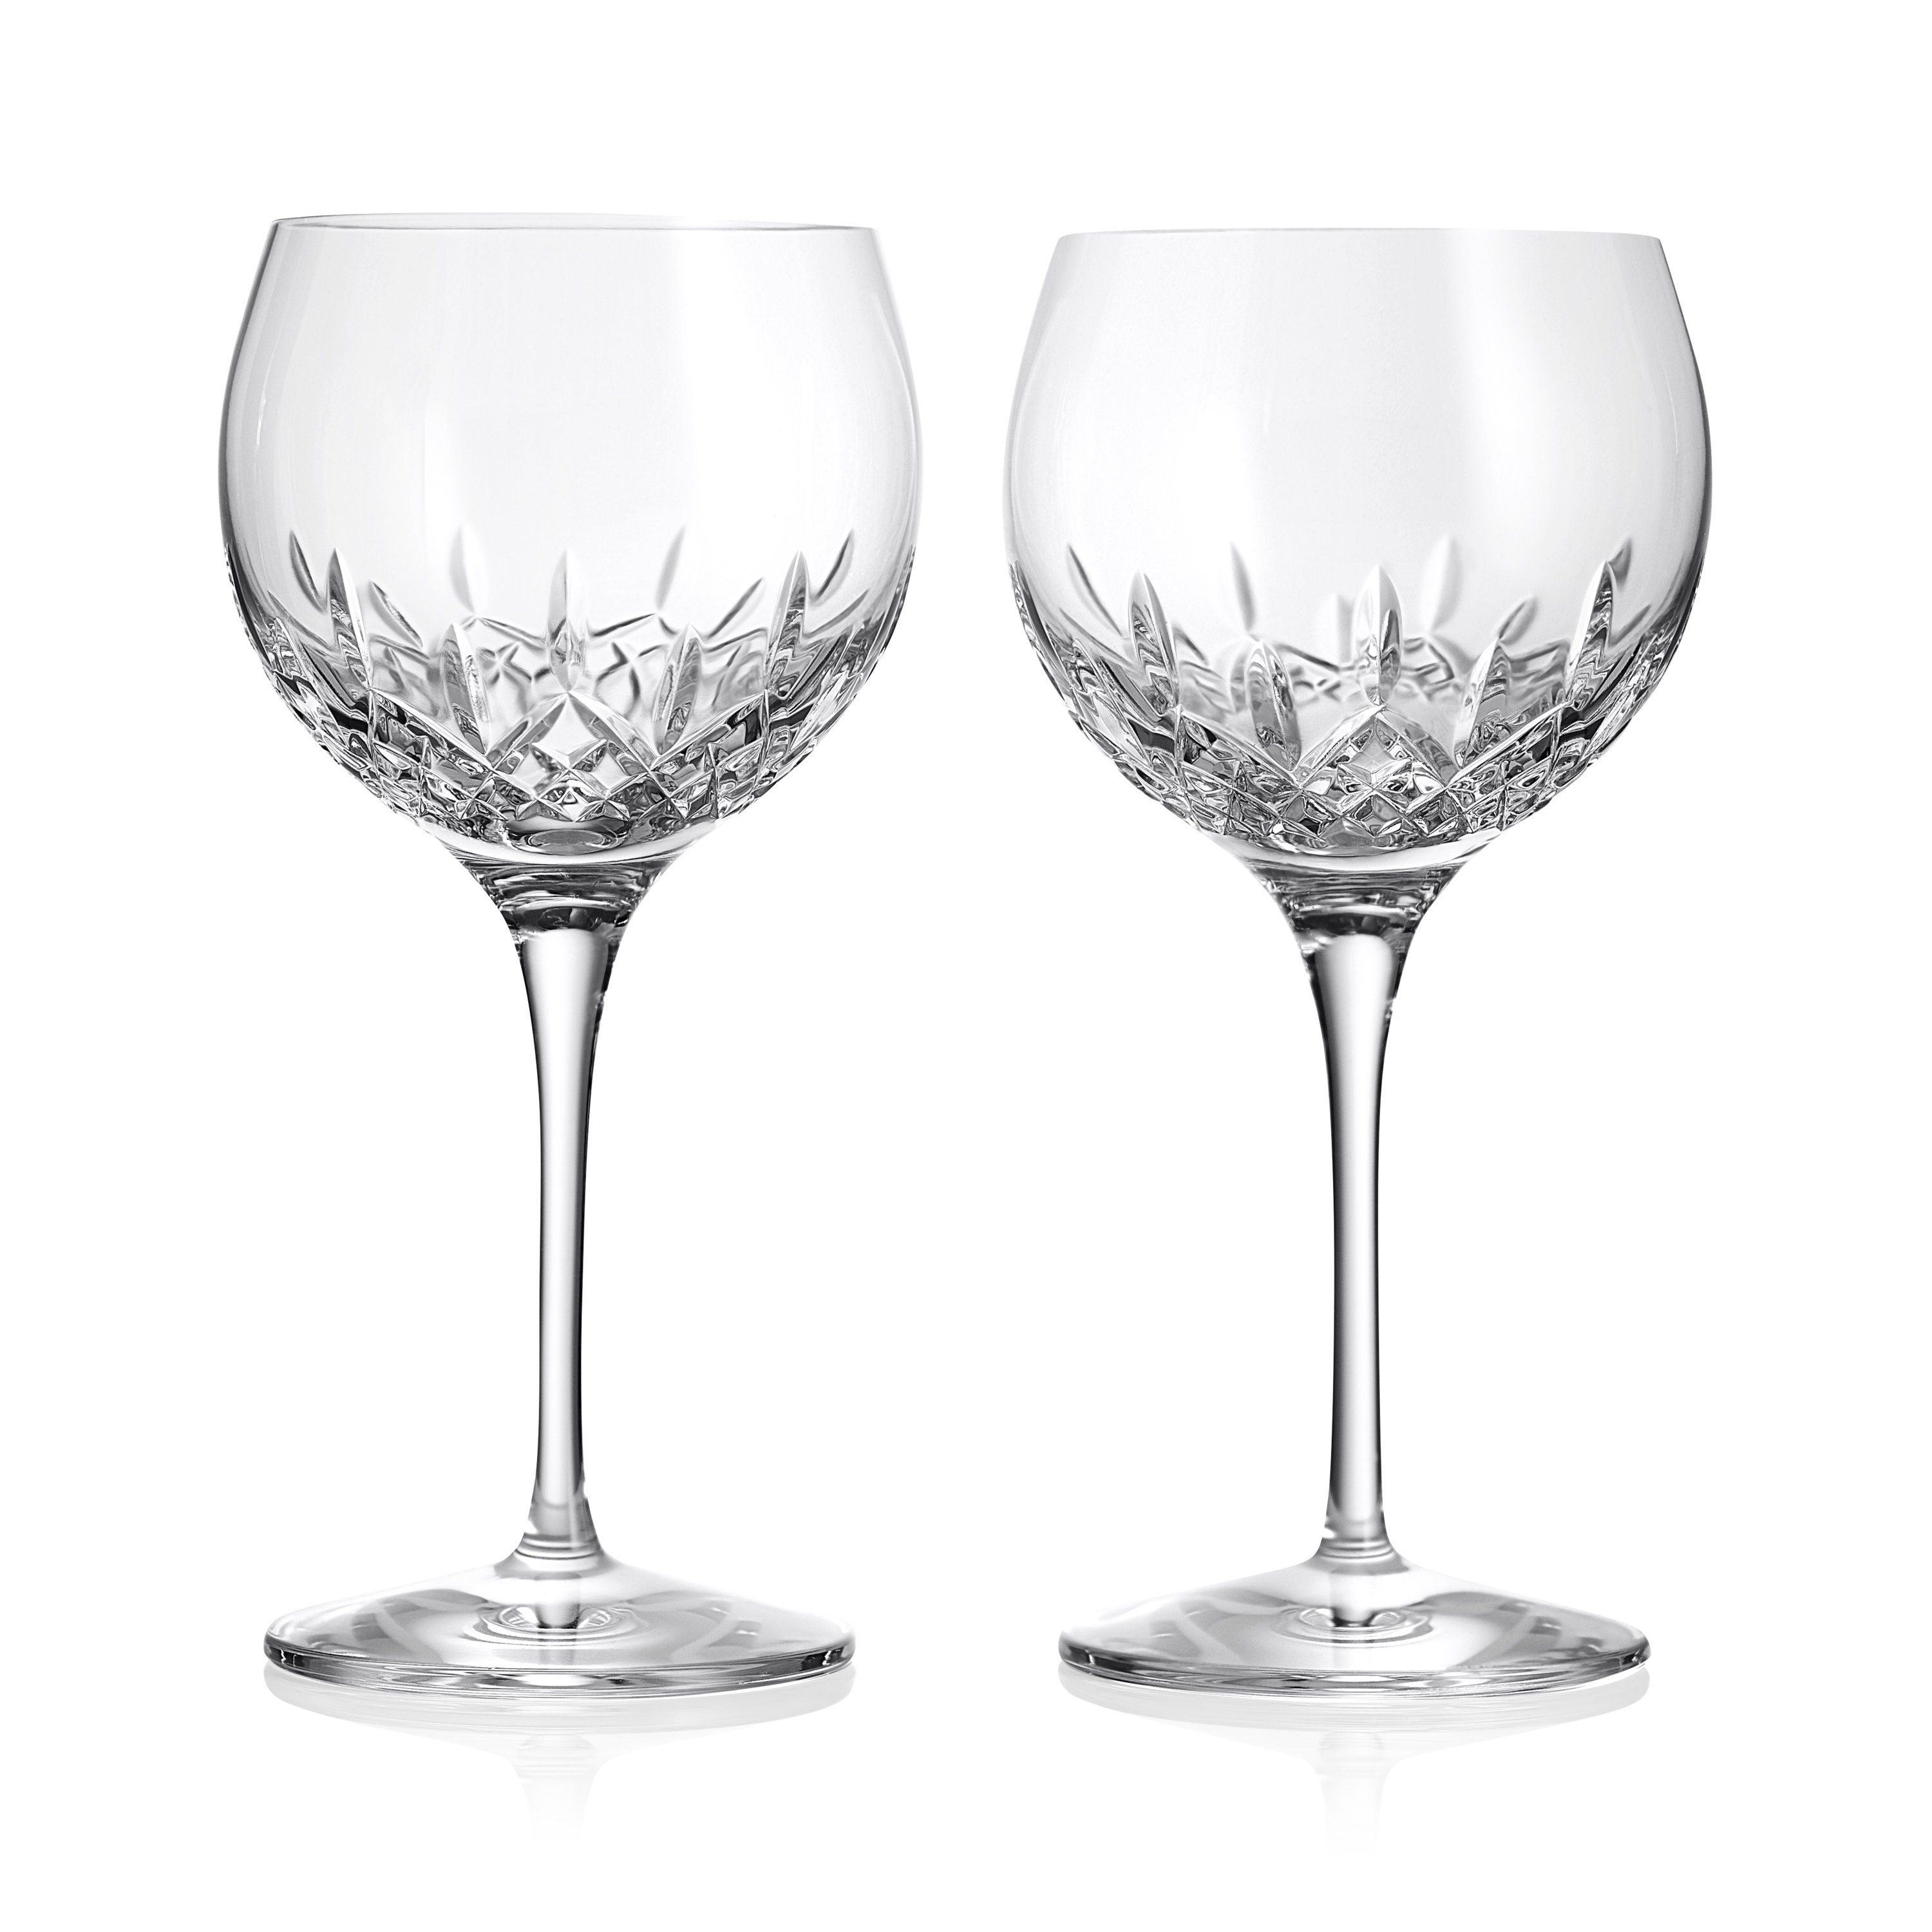 Waterford Classic Lismore Balloon Wine Glass, Single